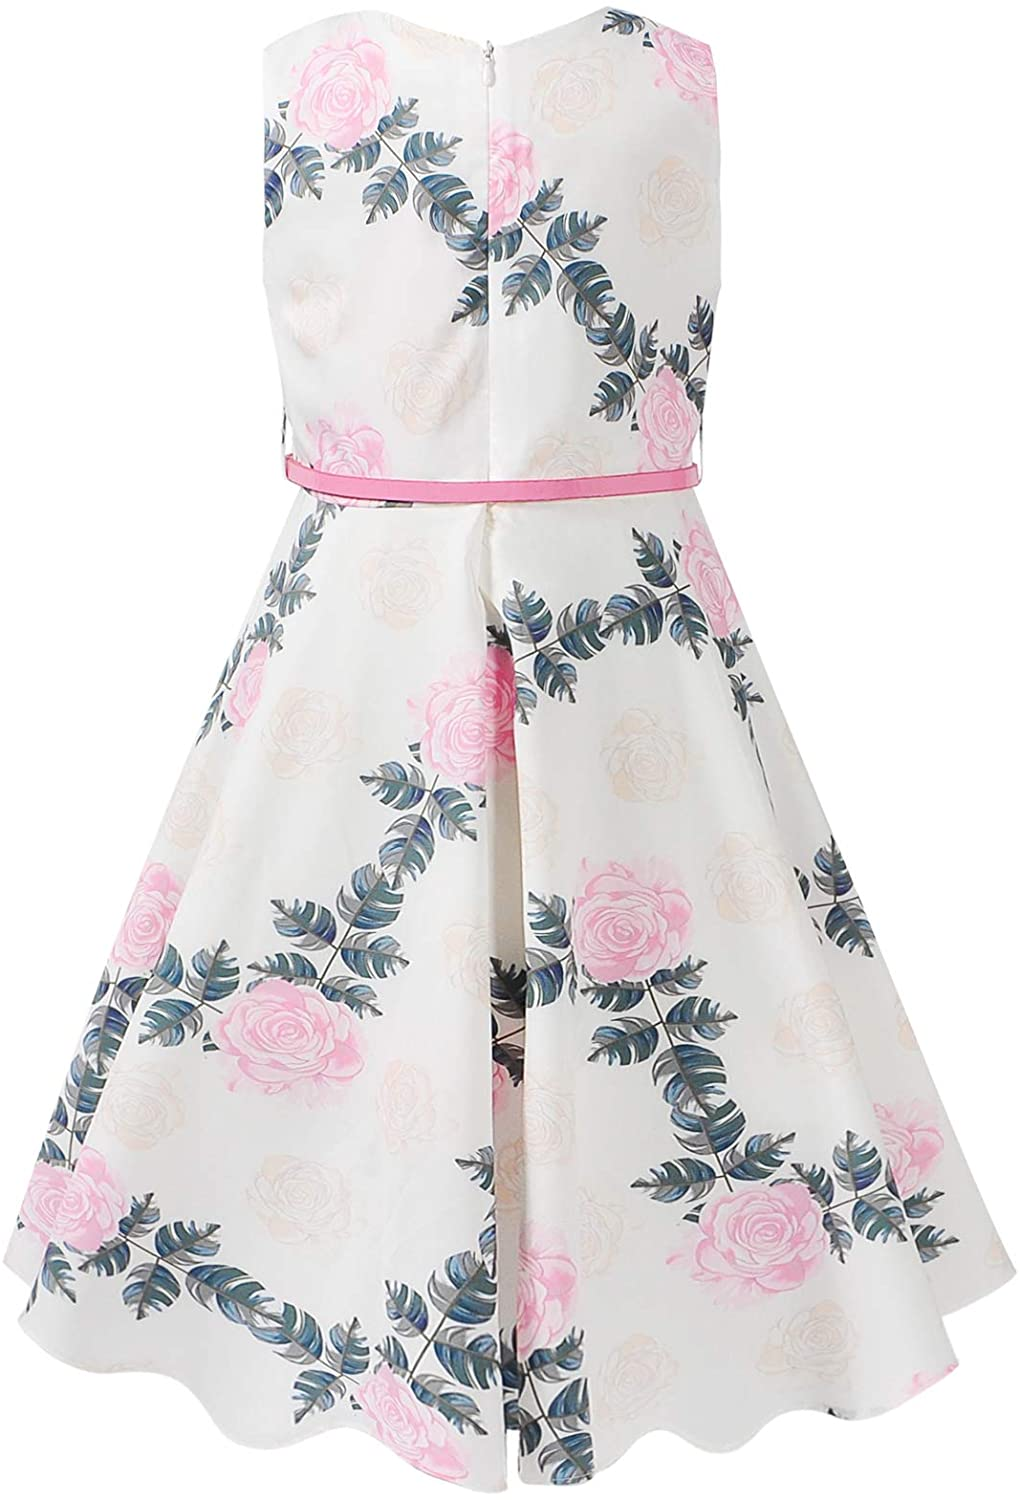 Girls Classy Vintage Floral Swing Kids Party Dresses